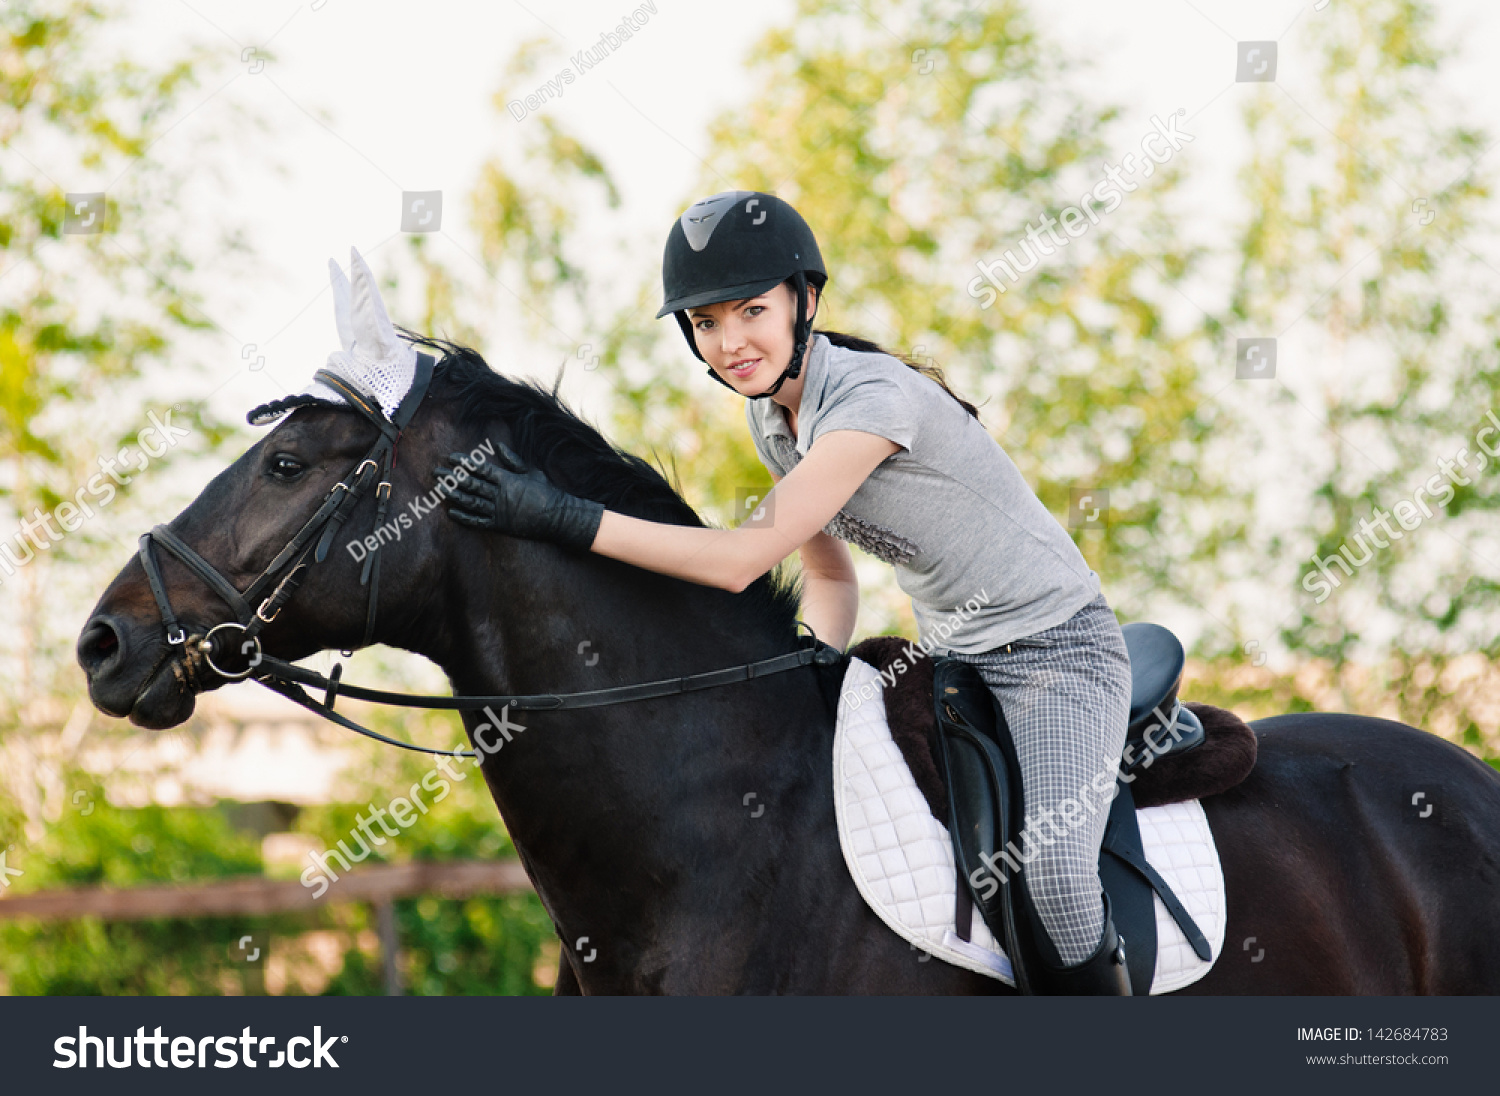 riding young woman portrait on horse in outdoor #142684783